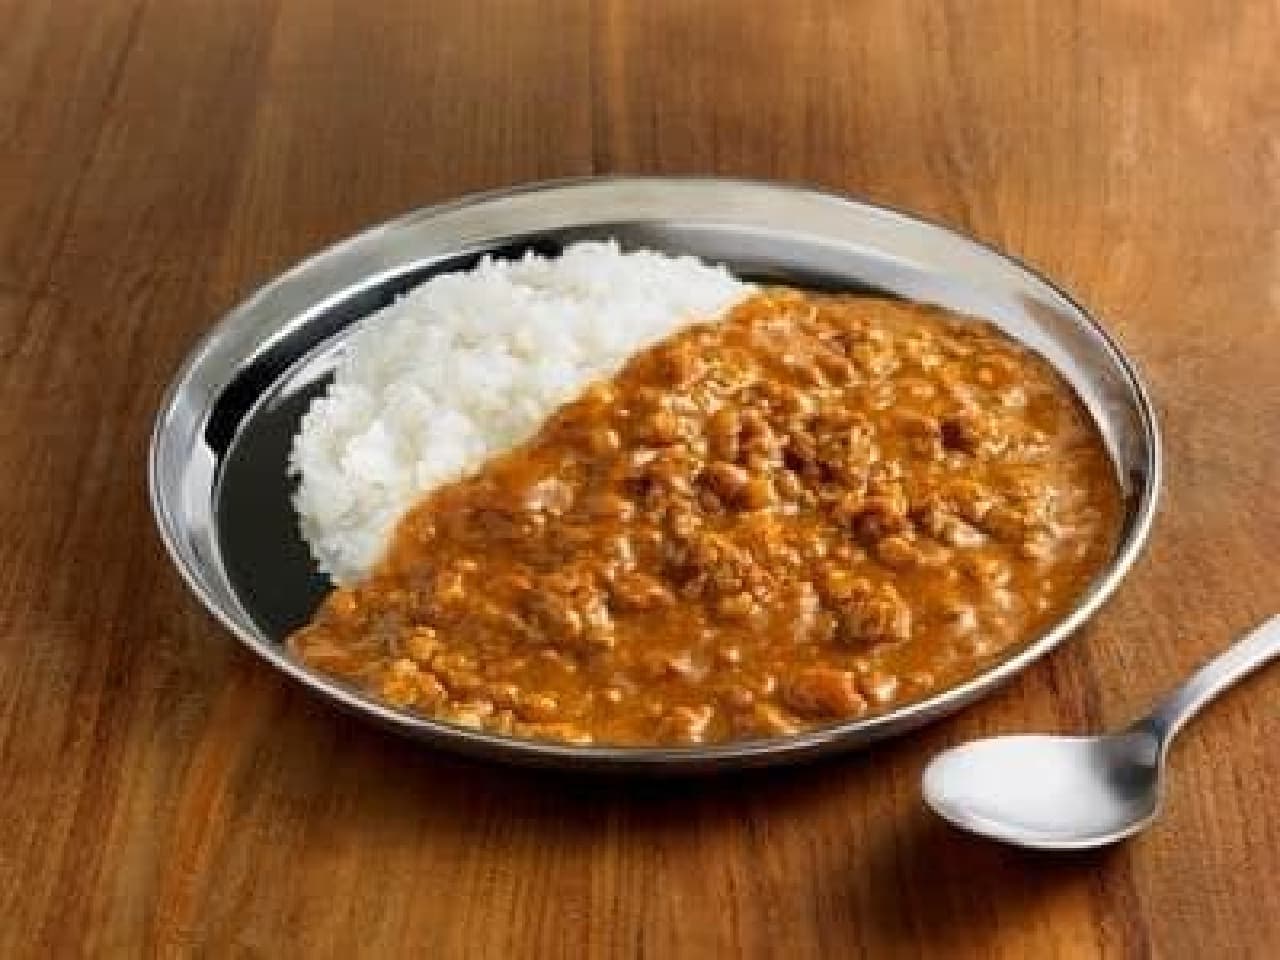 "Keema curry" with a high aroma of minced meat and spices